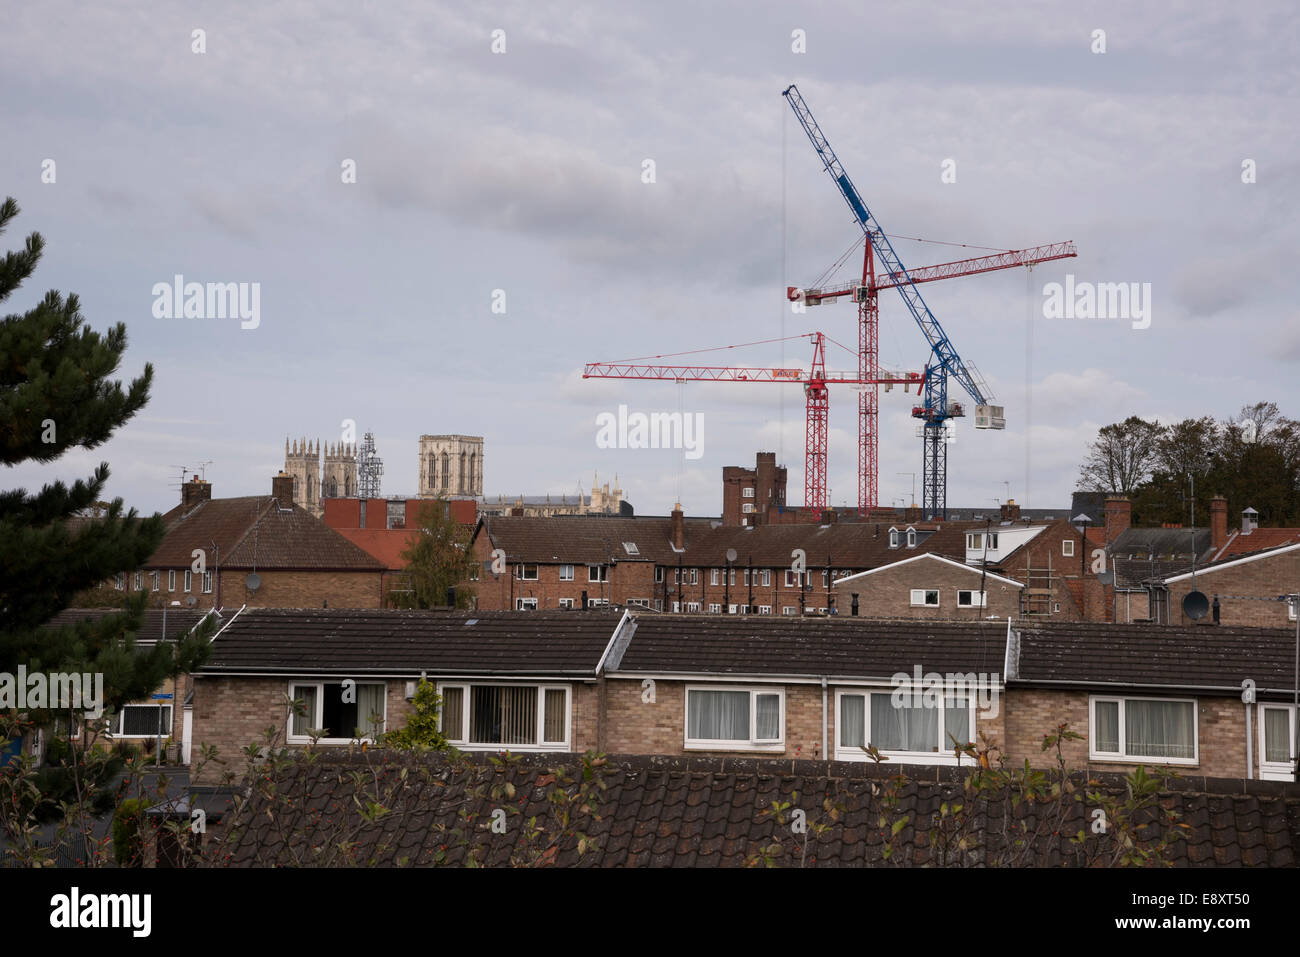 View over rooftops in York, North Yorkshire, England, UK - 3 ancient Minster towers and 3 modern cranes towering over houses in C20th housing estate. Stock Photo